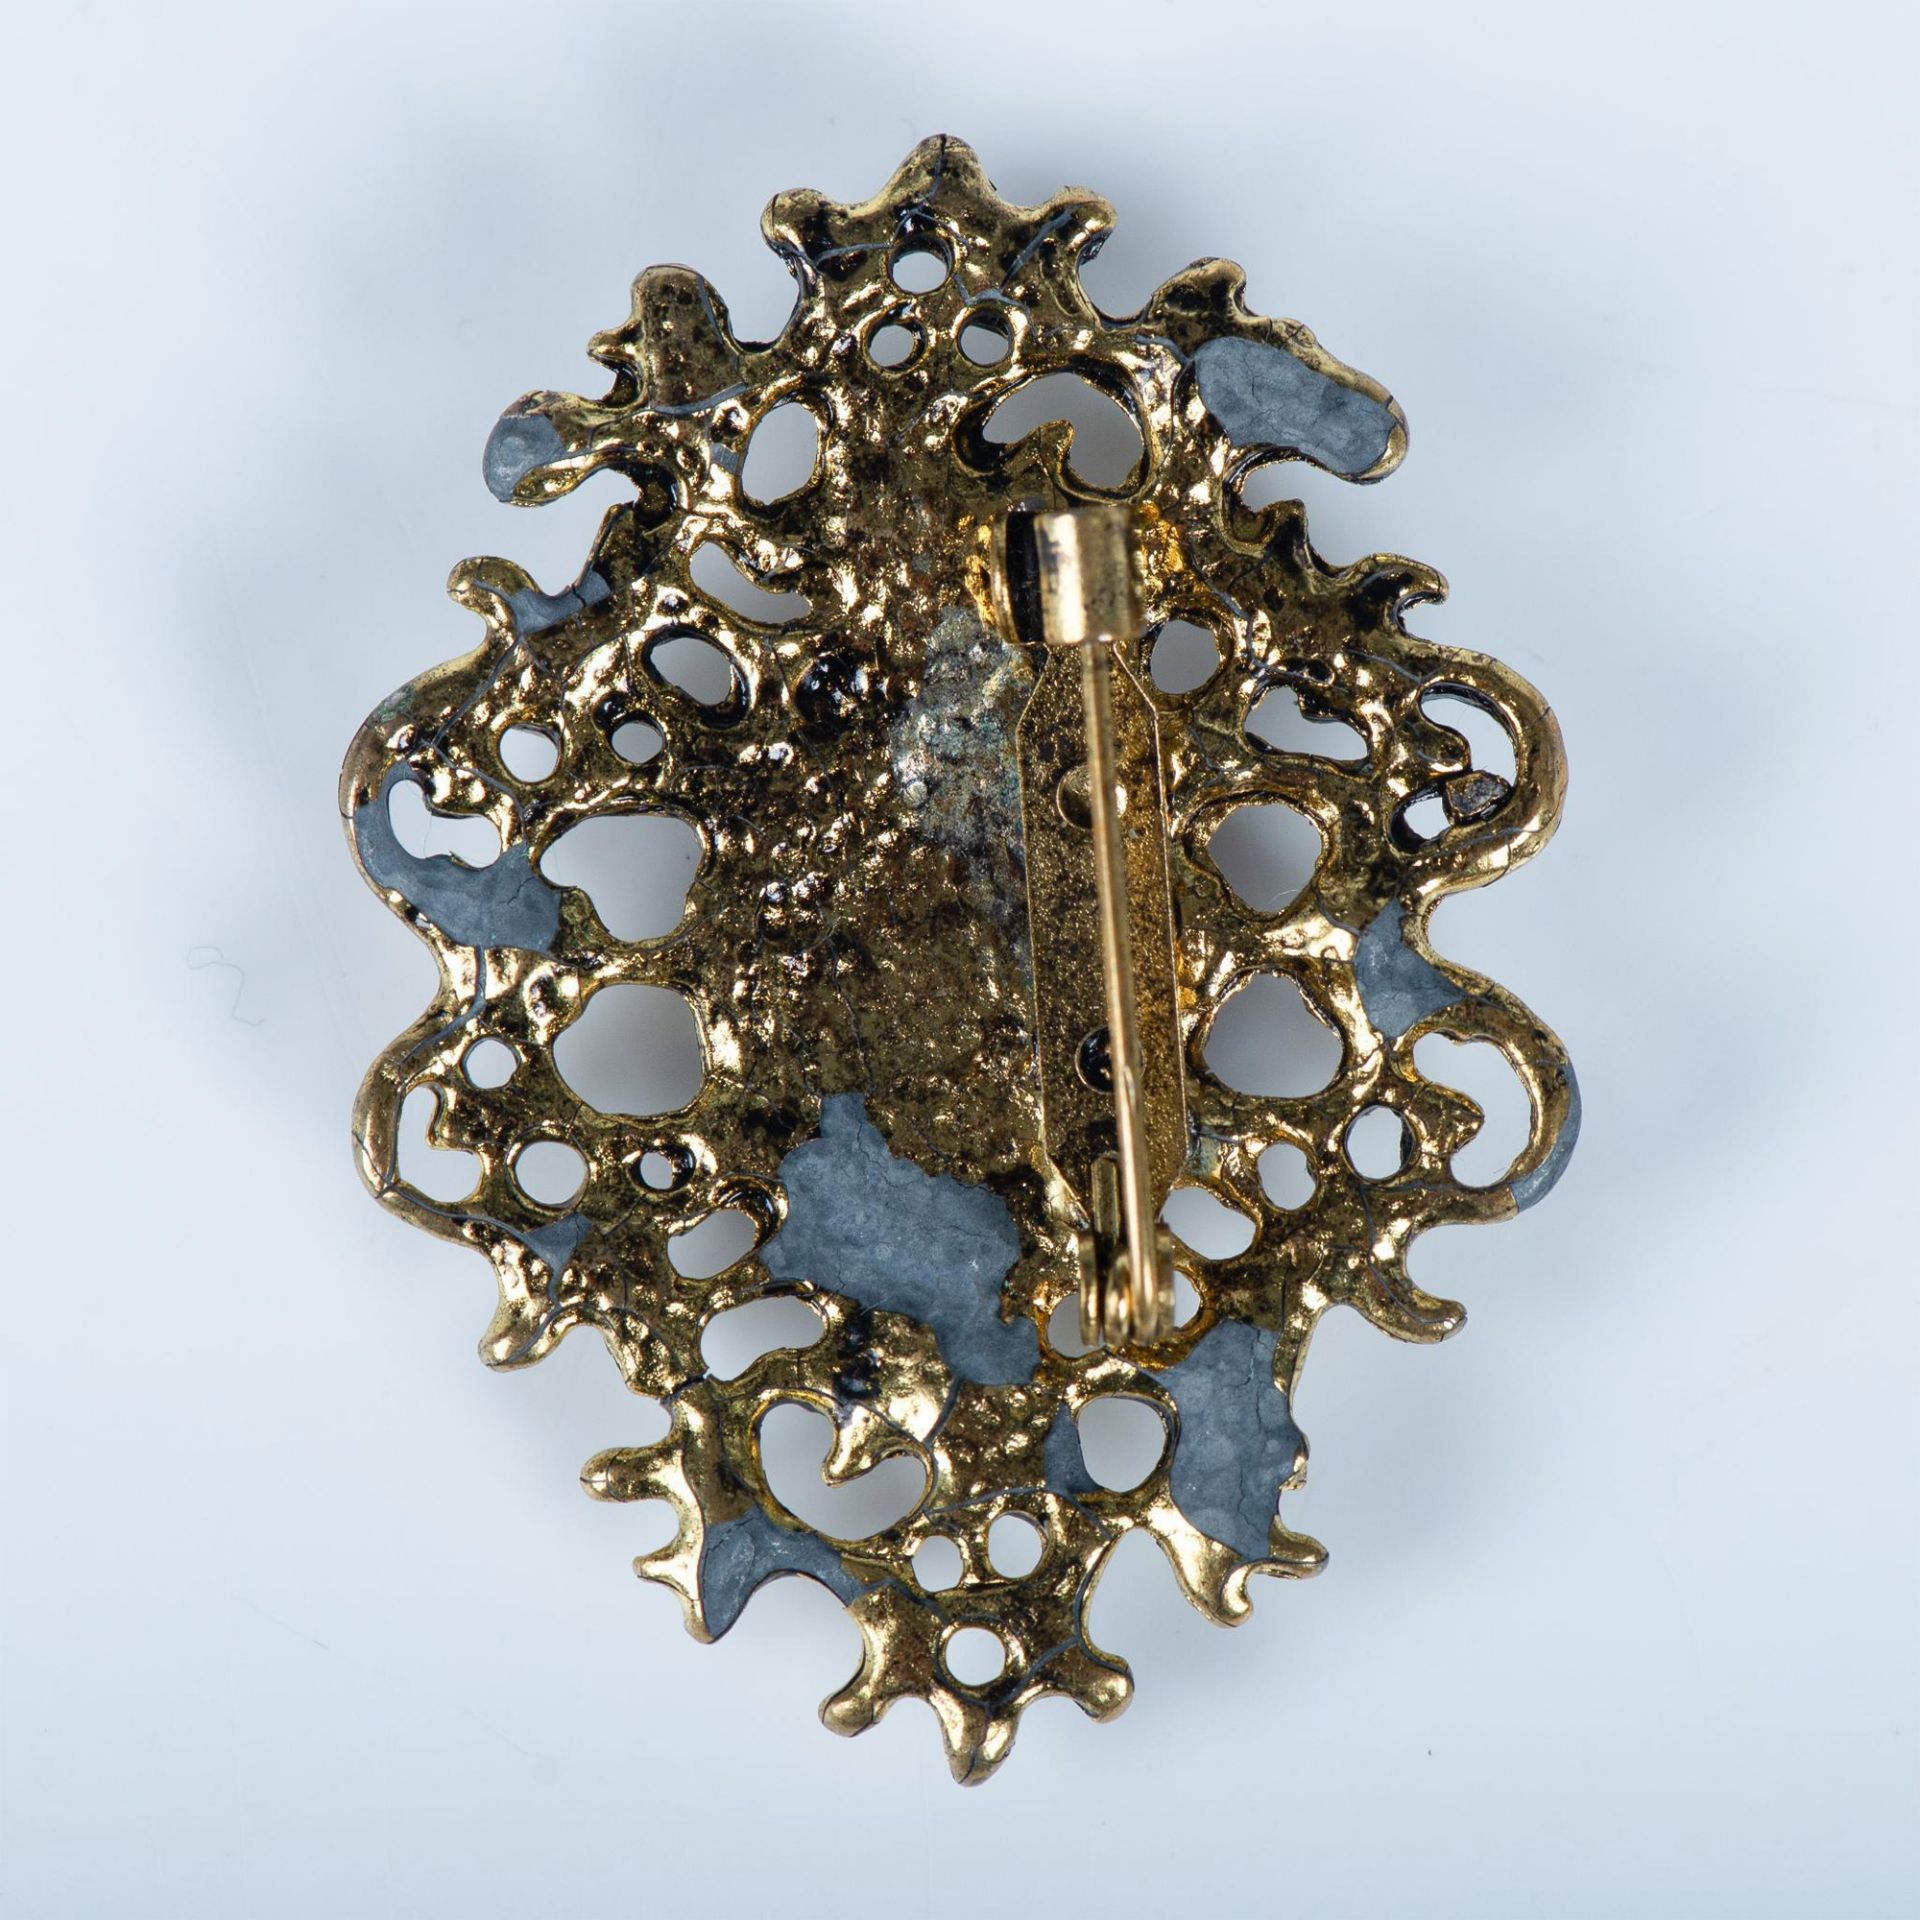 Ornate Gold Metal, Faux Pearl and Blue Rhinestone Brooch - Image 2 of 5